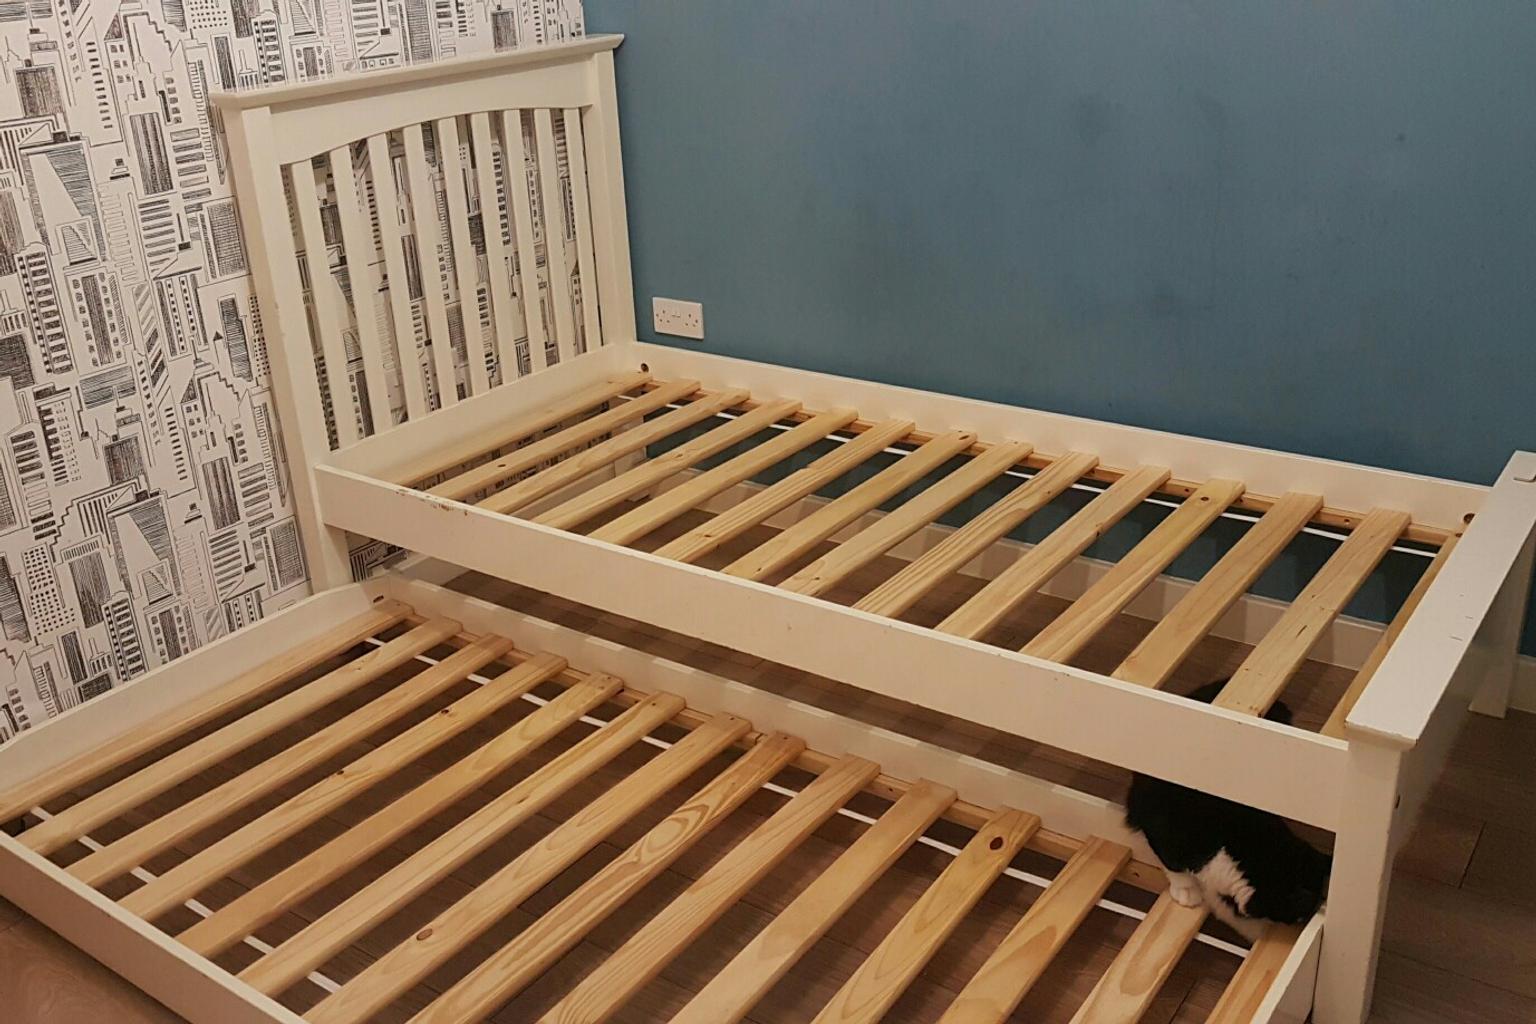 m&s childrens beds